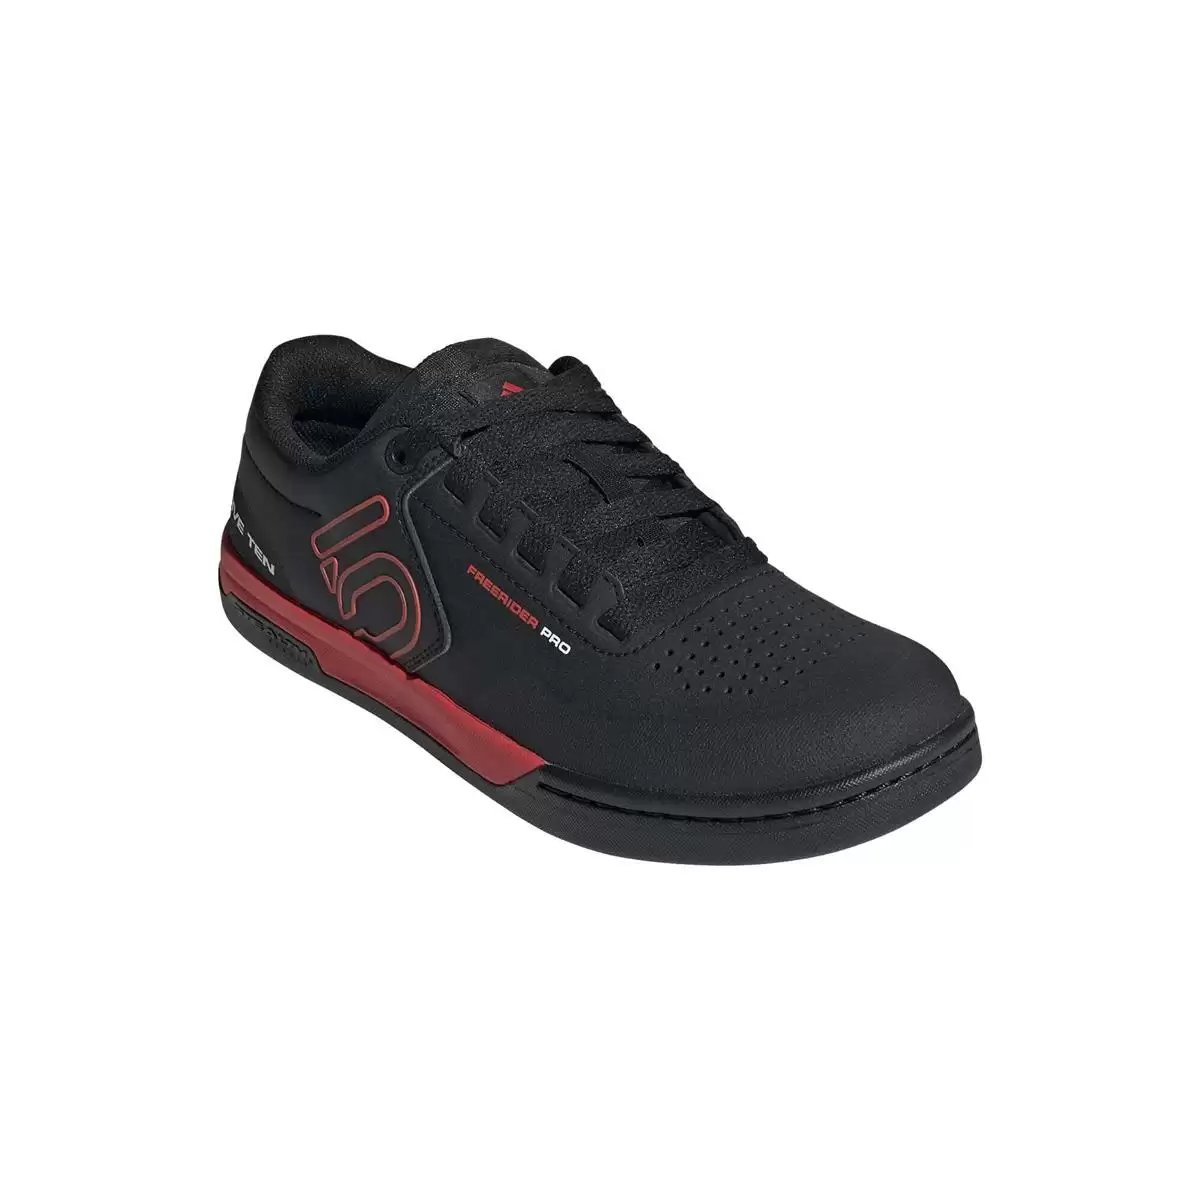 MTB Flat Shoes Freerider Pro Black/Red Size 50,5 #1